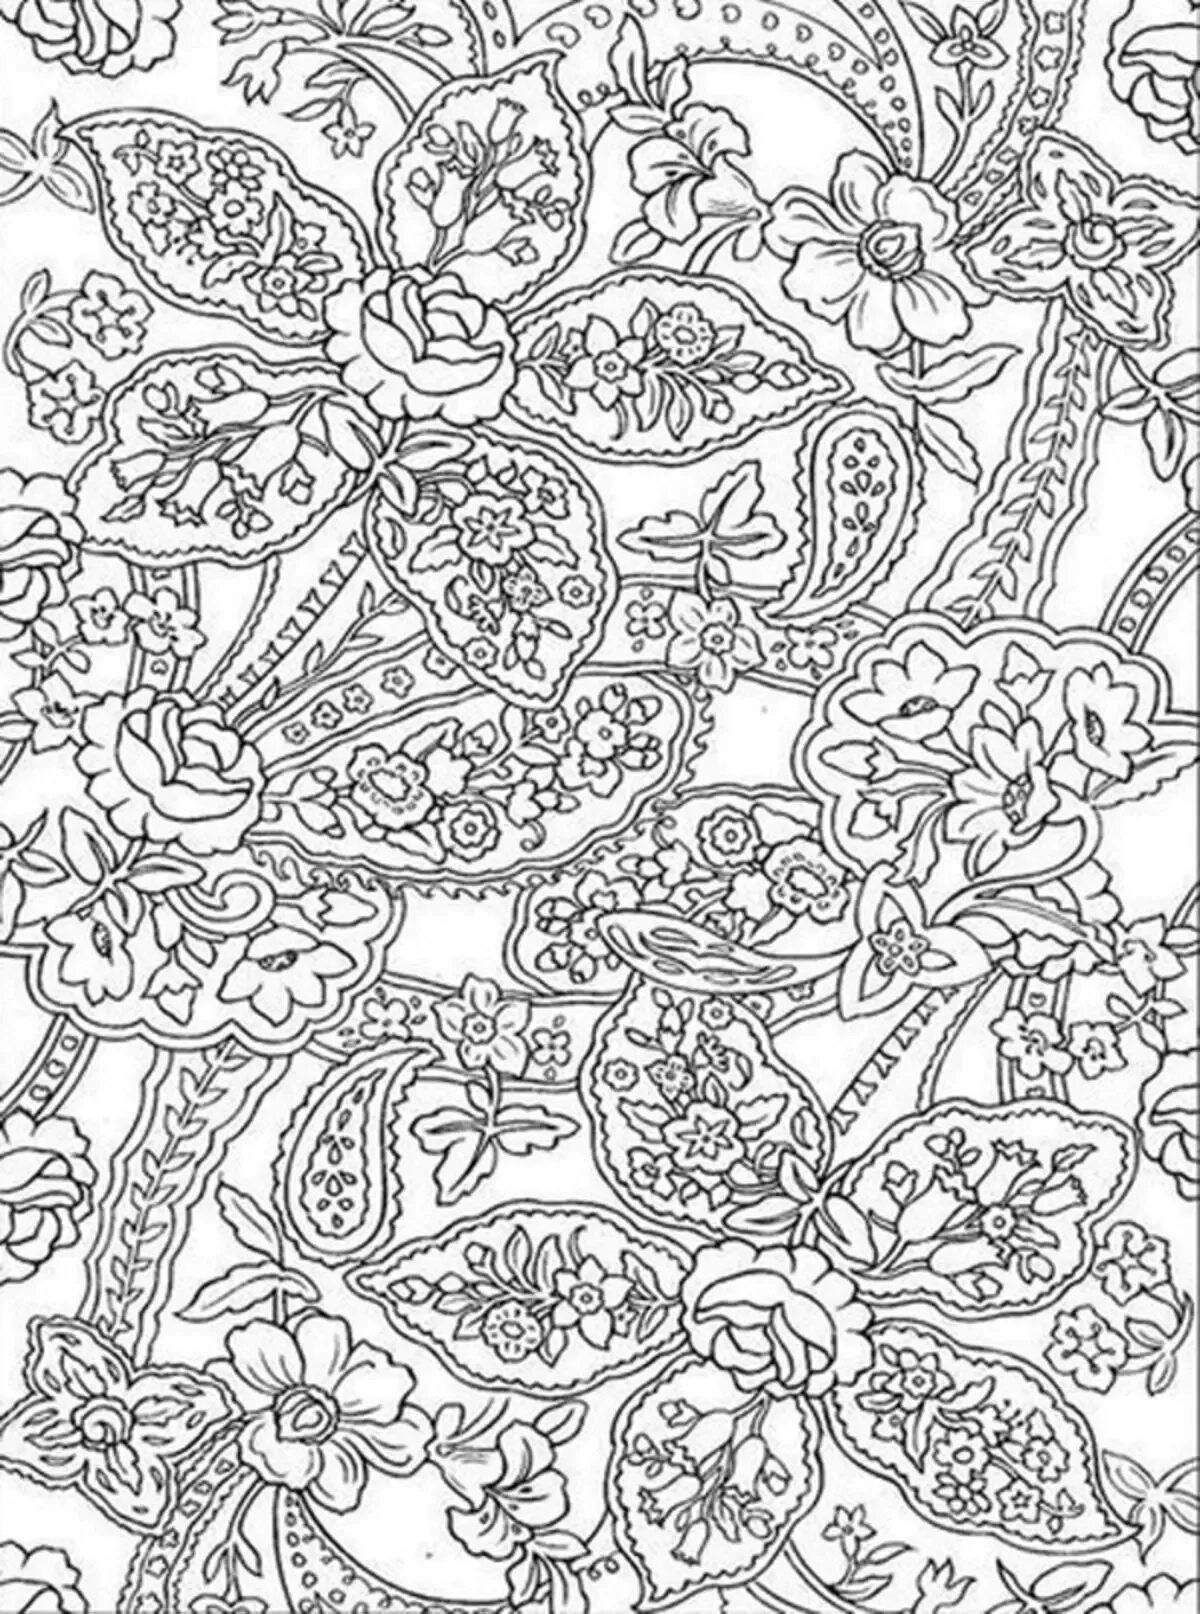 Intriguing nerve coloring page